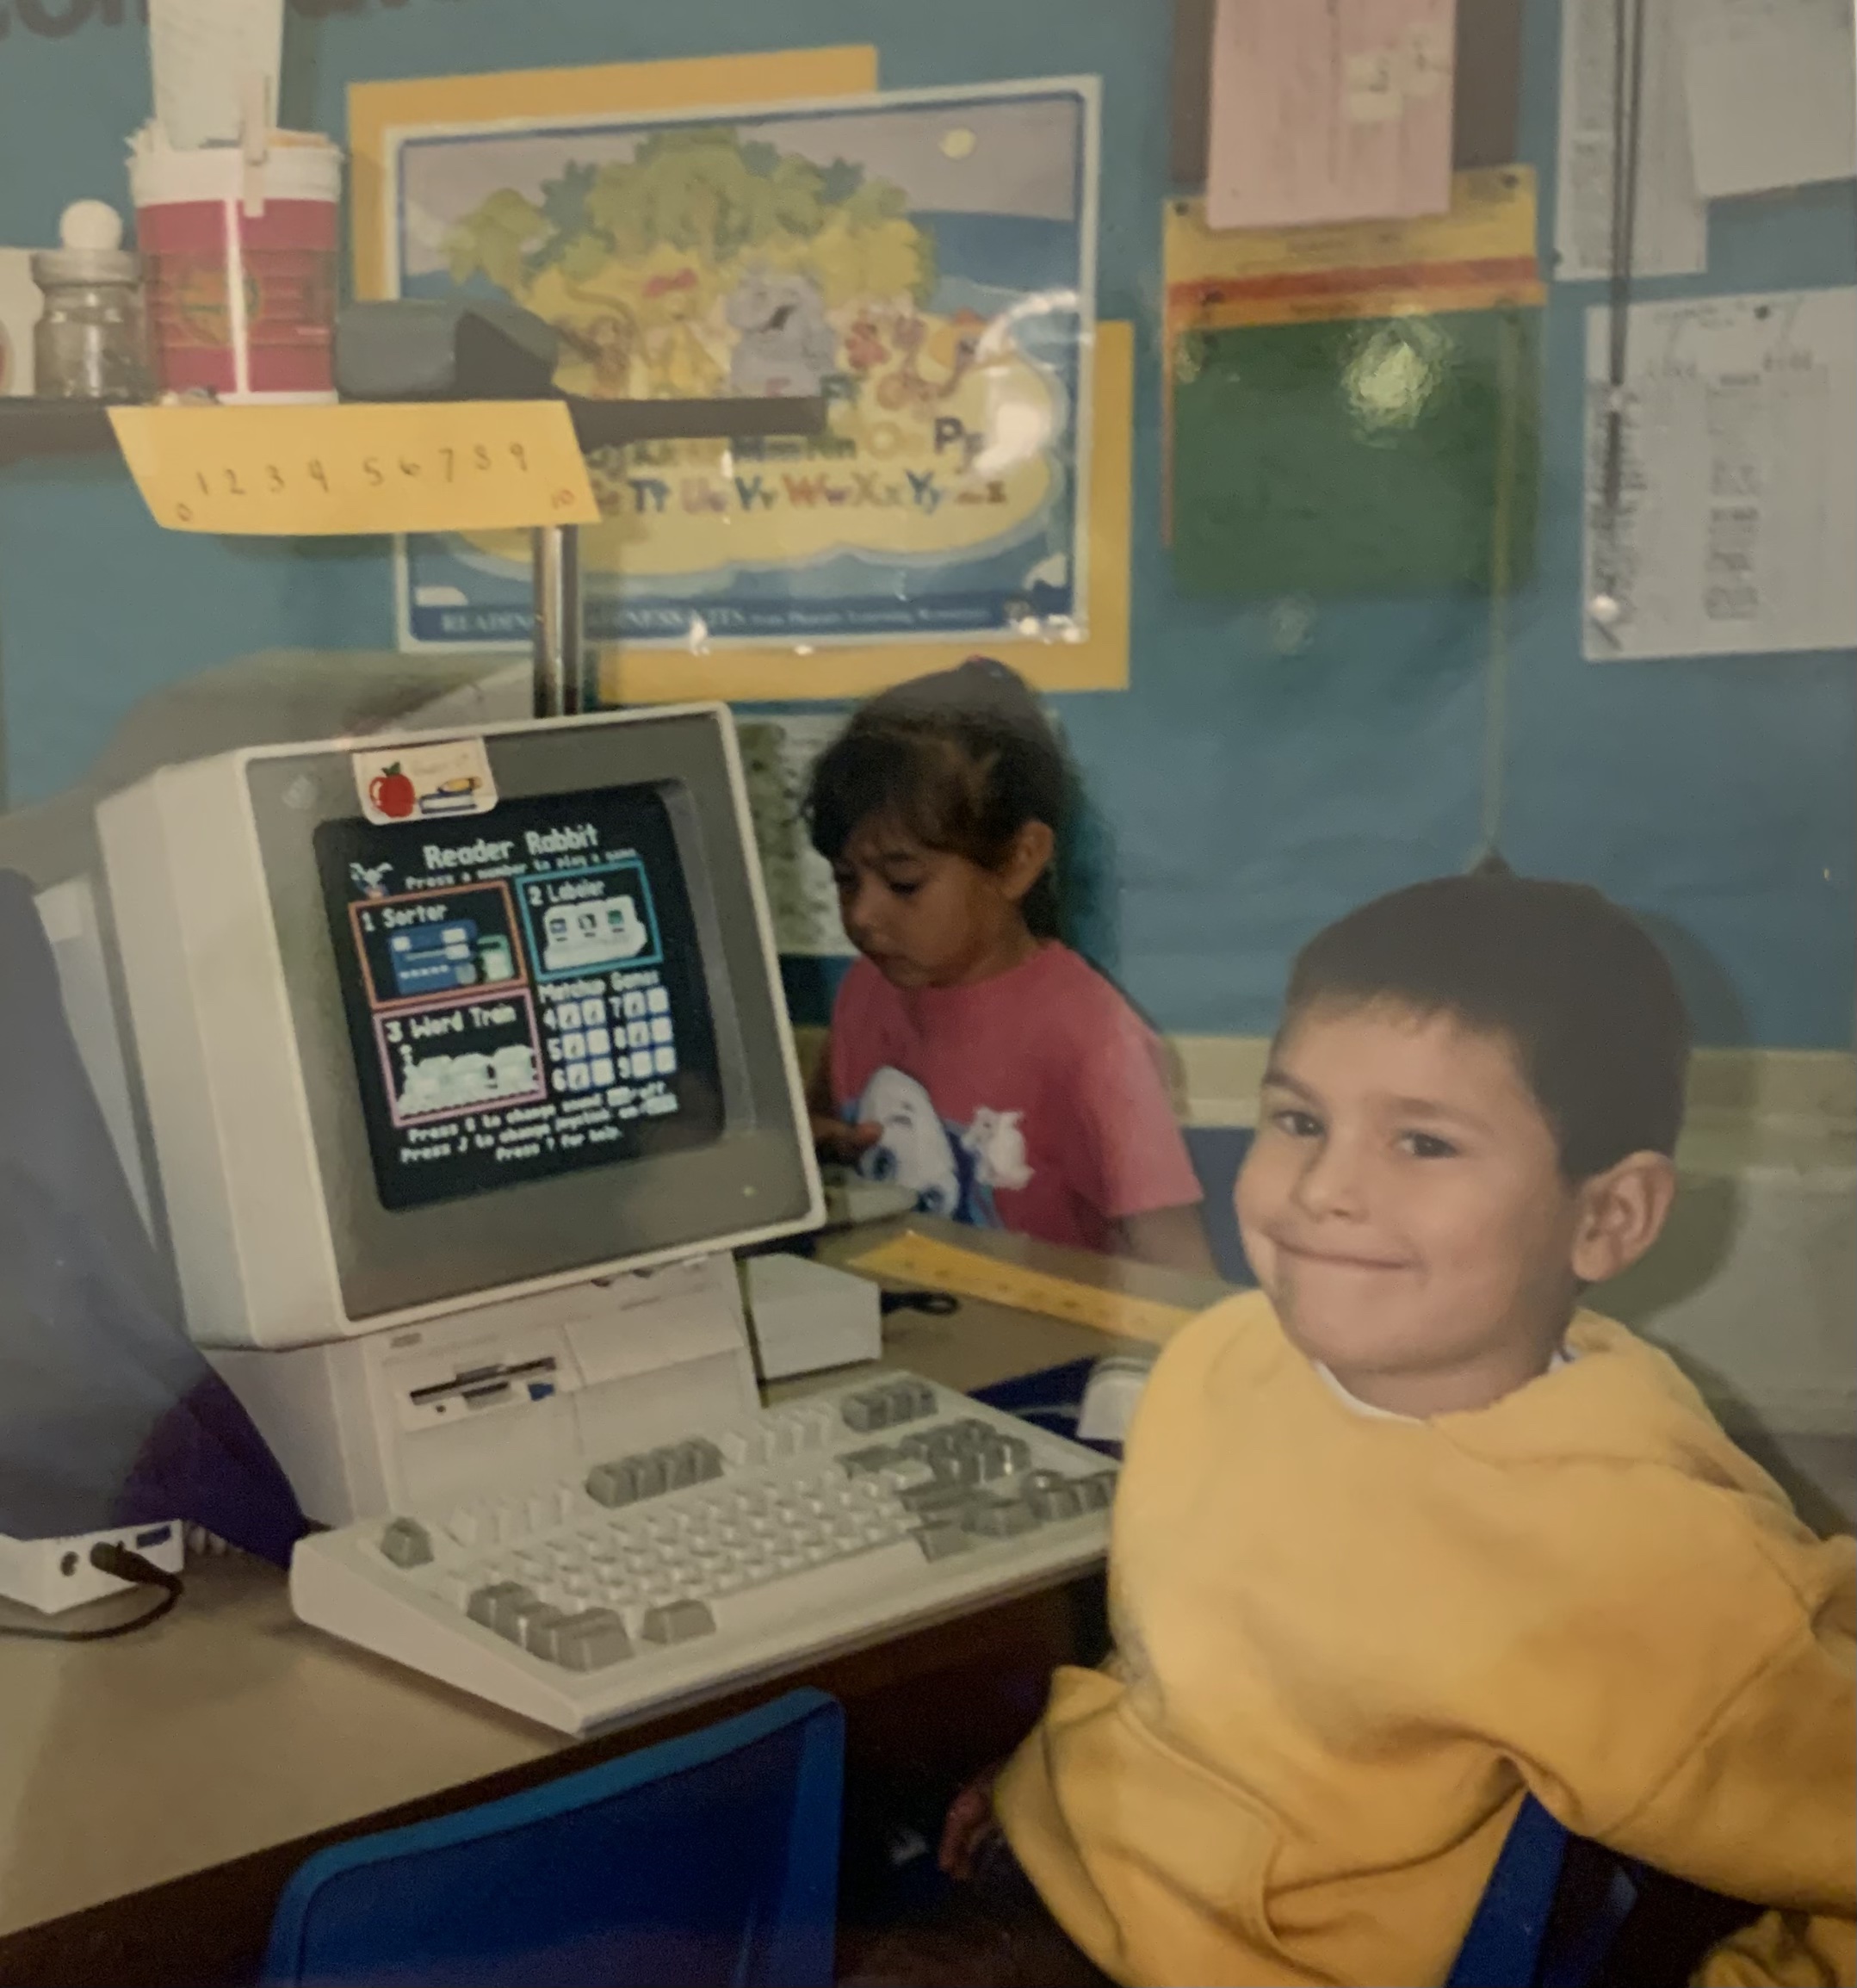 Playing Reader Rabbit on an Apple IIc in 1996